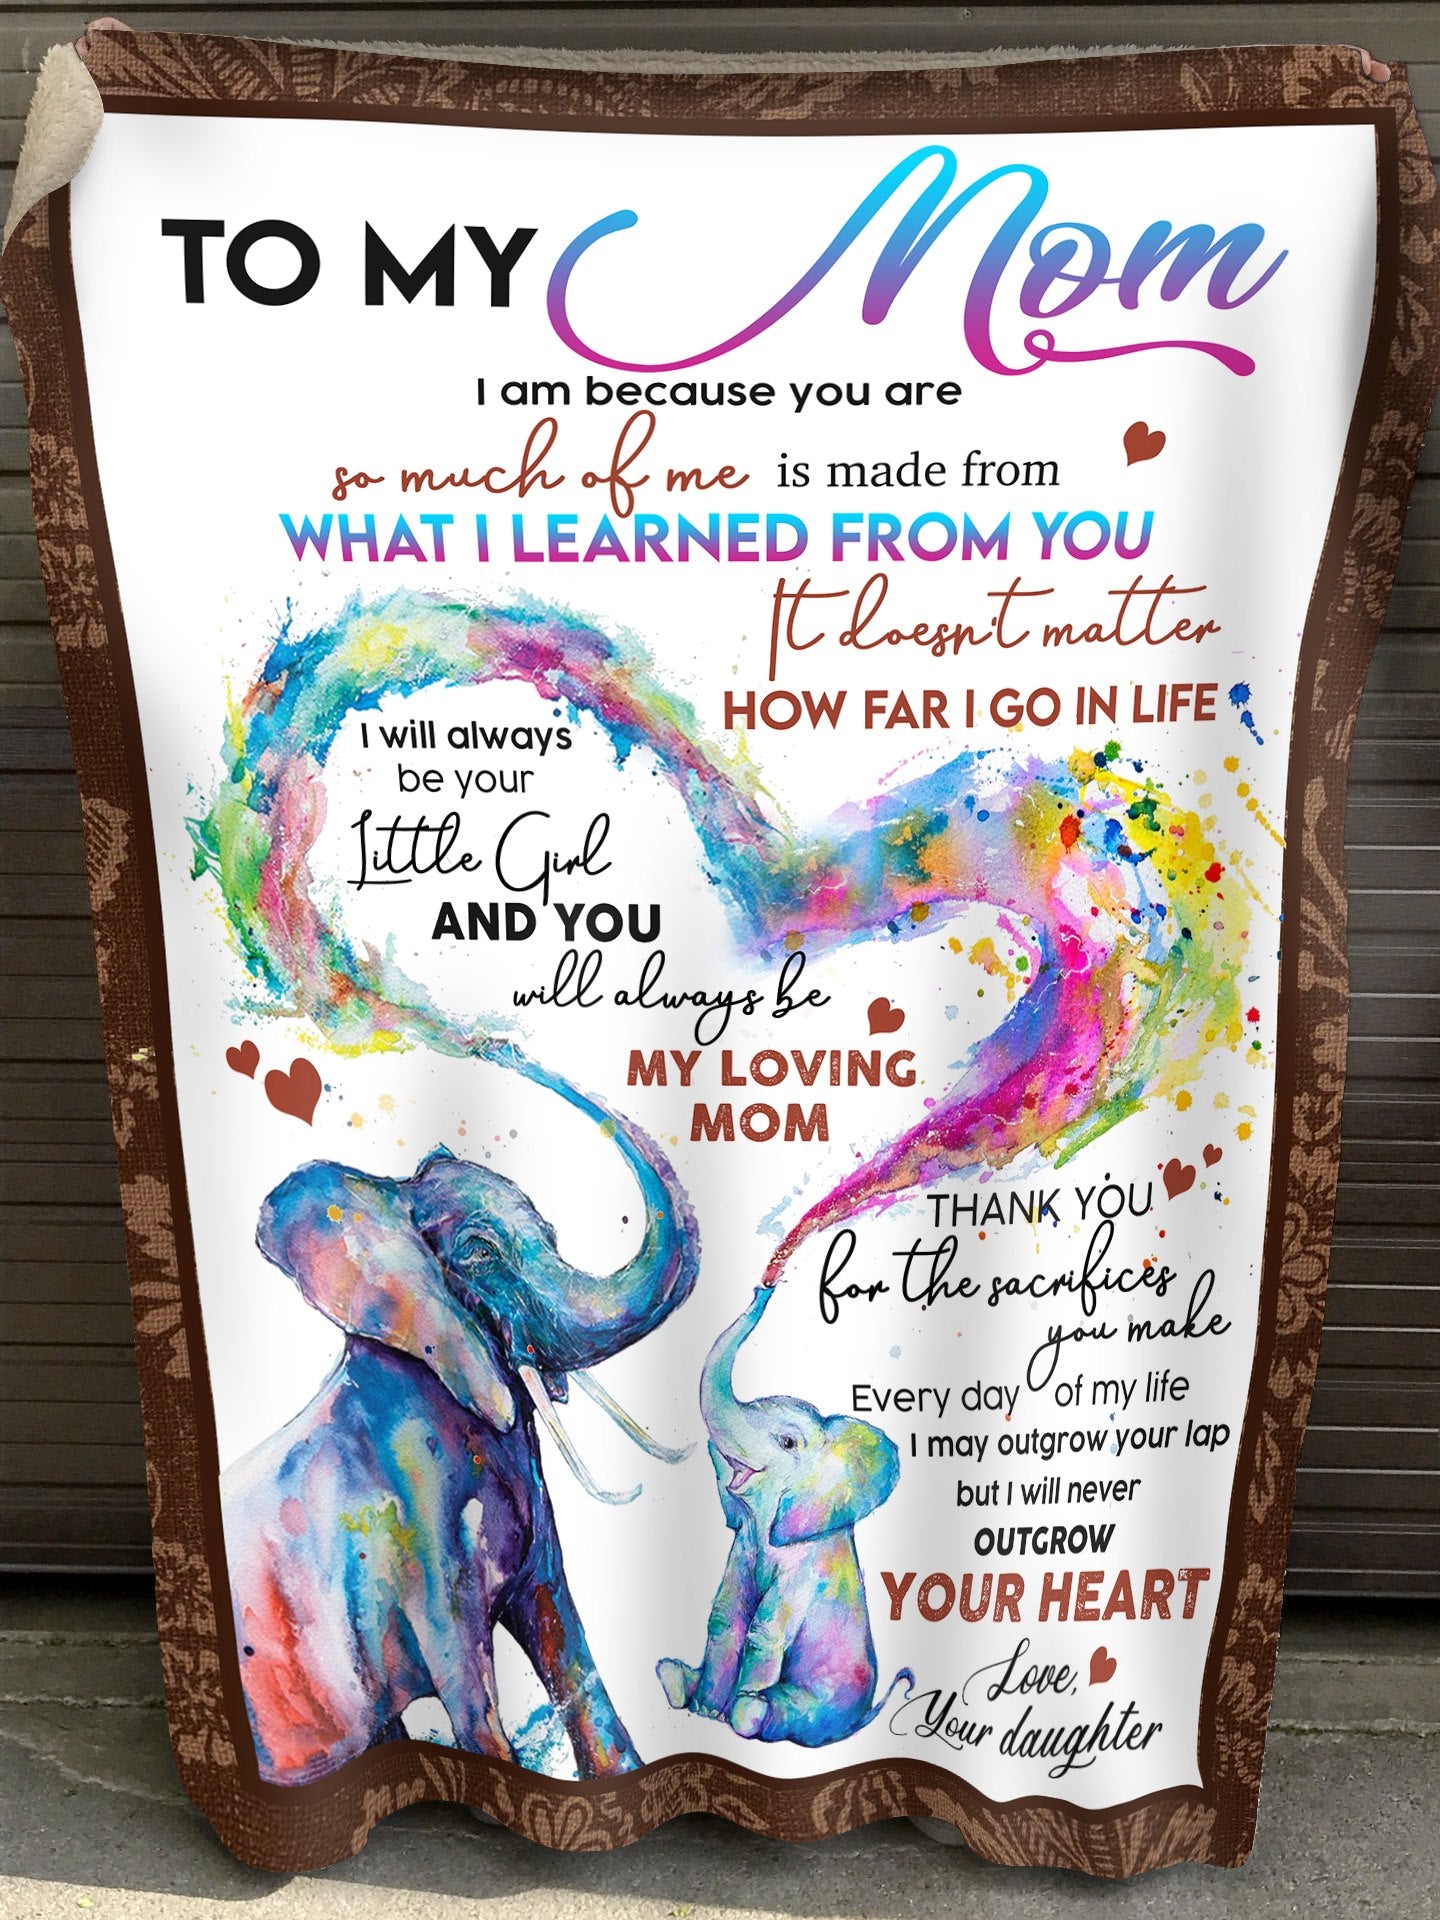 You Will Always My Loving Mom, Fleece Blanket - Quilt Blanket, Best Mother’s Day Gift Ideas, Mother’s Day Gift From Daughter To Mom, Home Decor Bedding Couch Sofa Soft and Comfy Cozy			 1617090065767.jpg